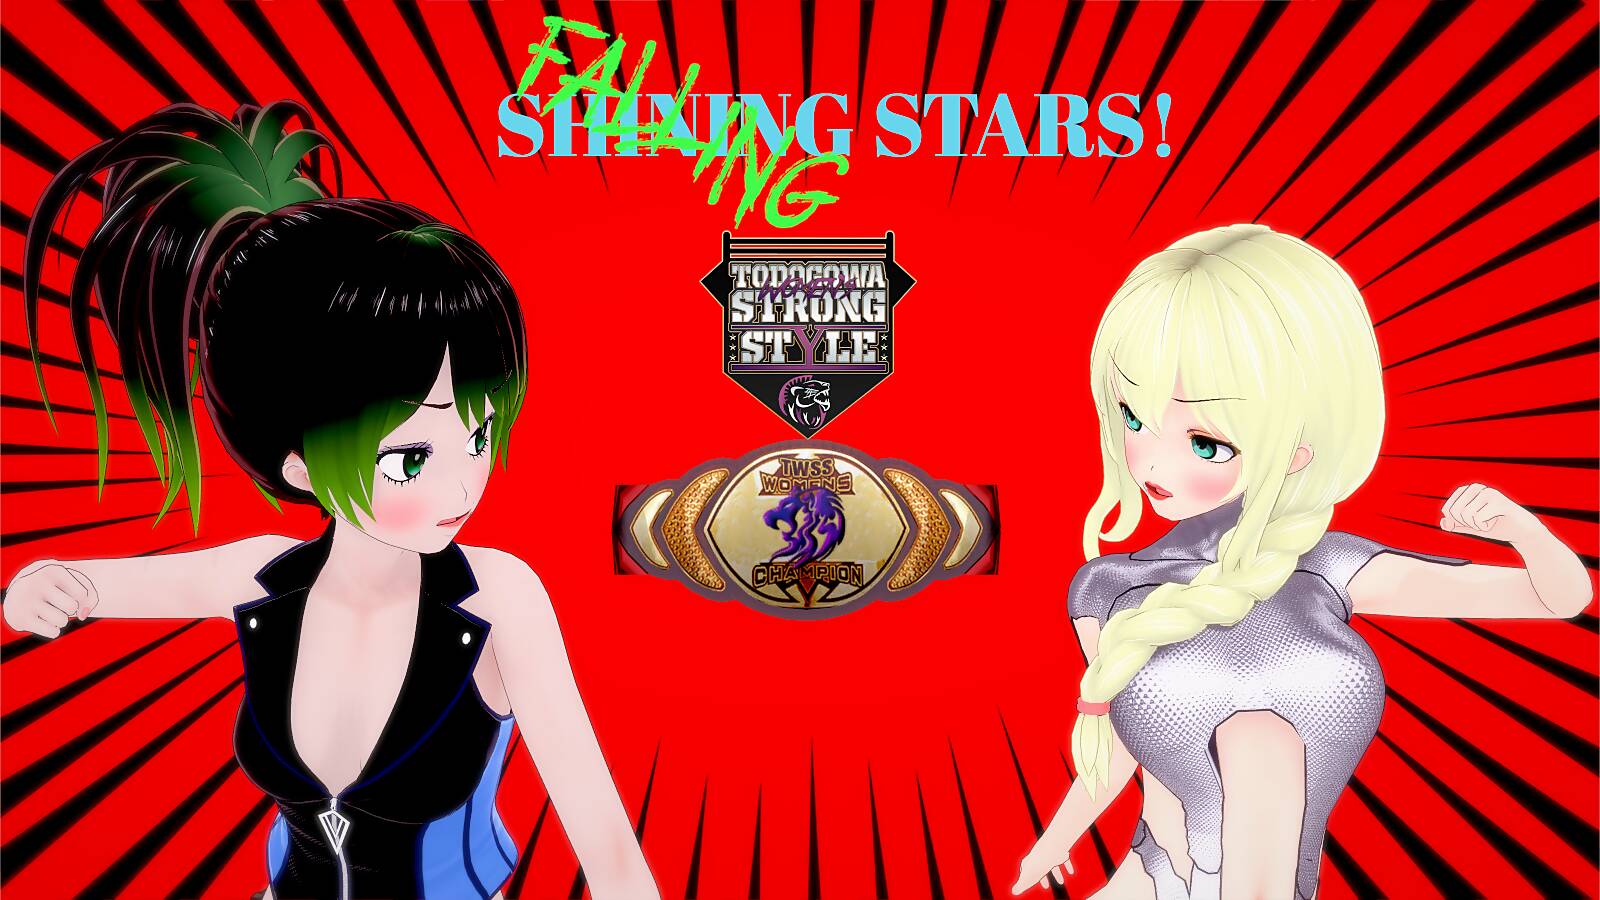 Falling Stars porn xxx game download cover